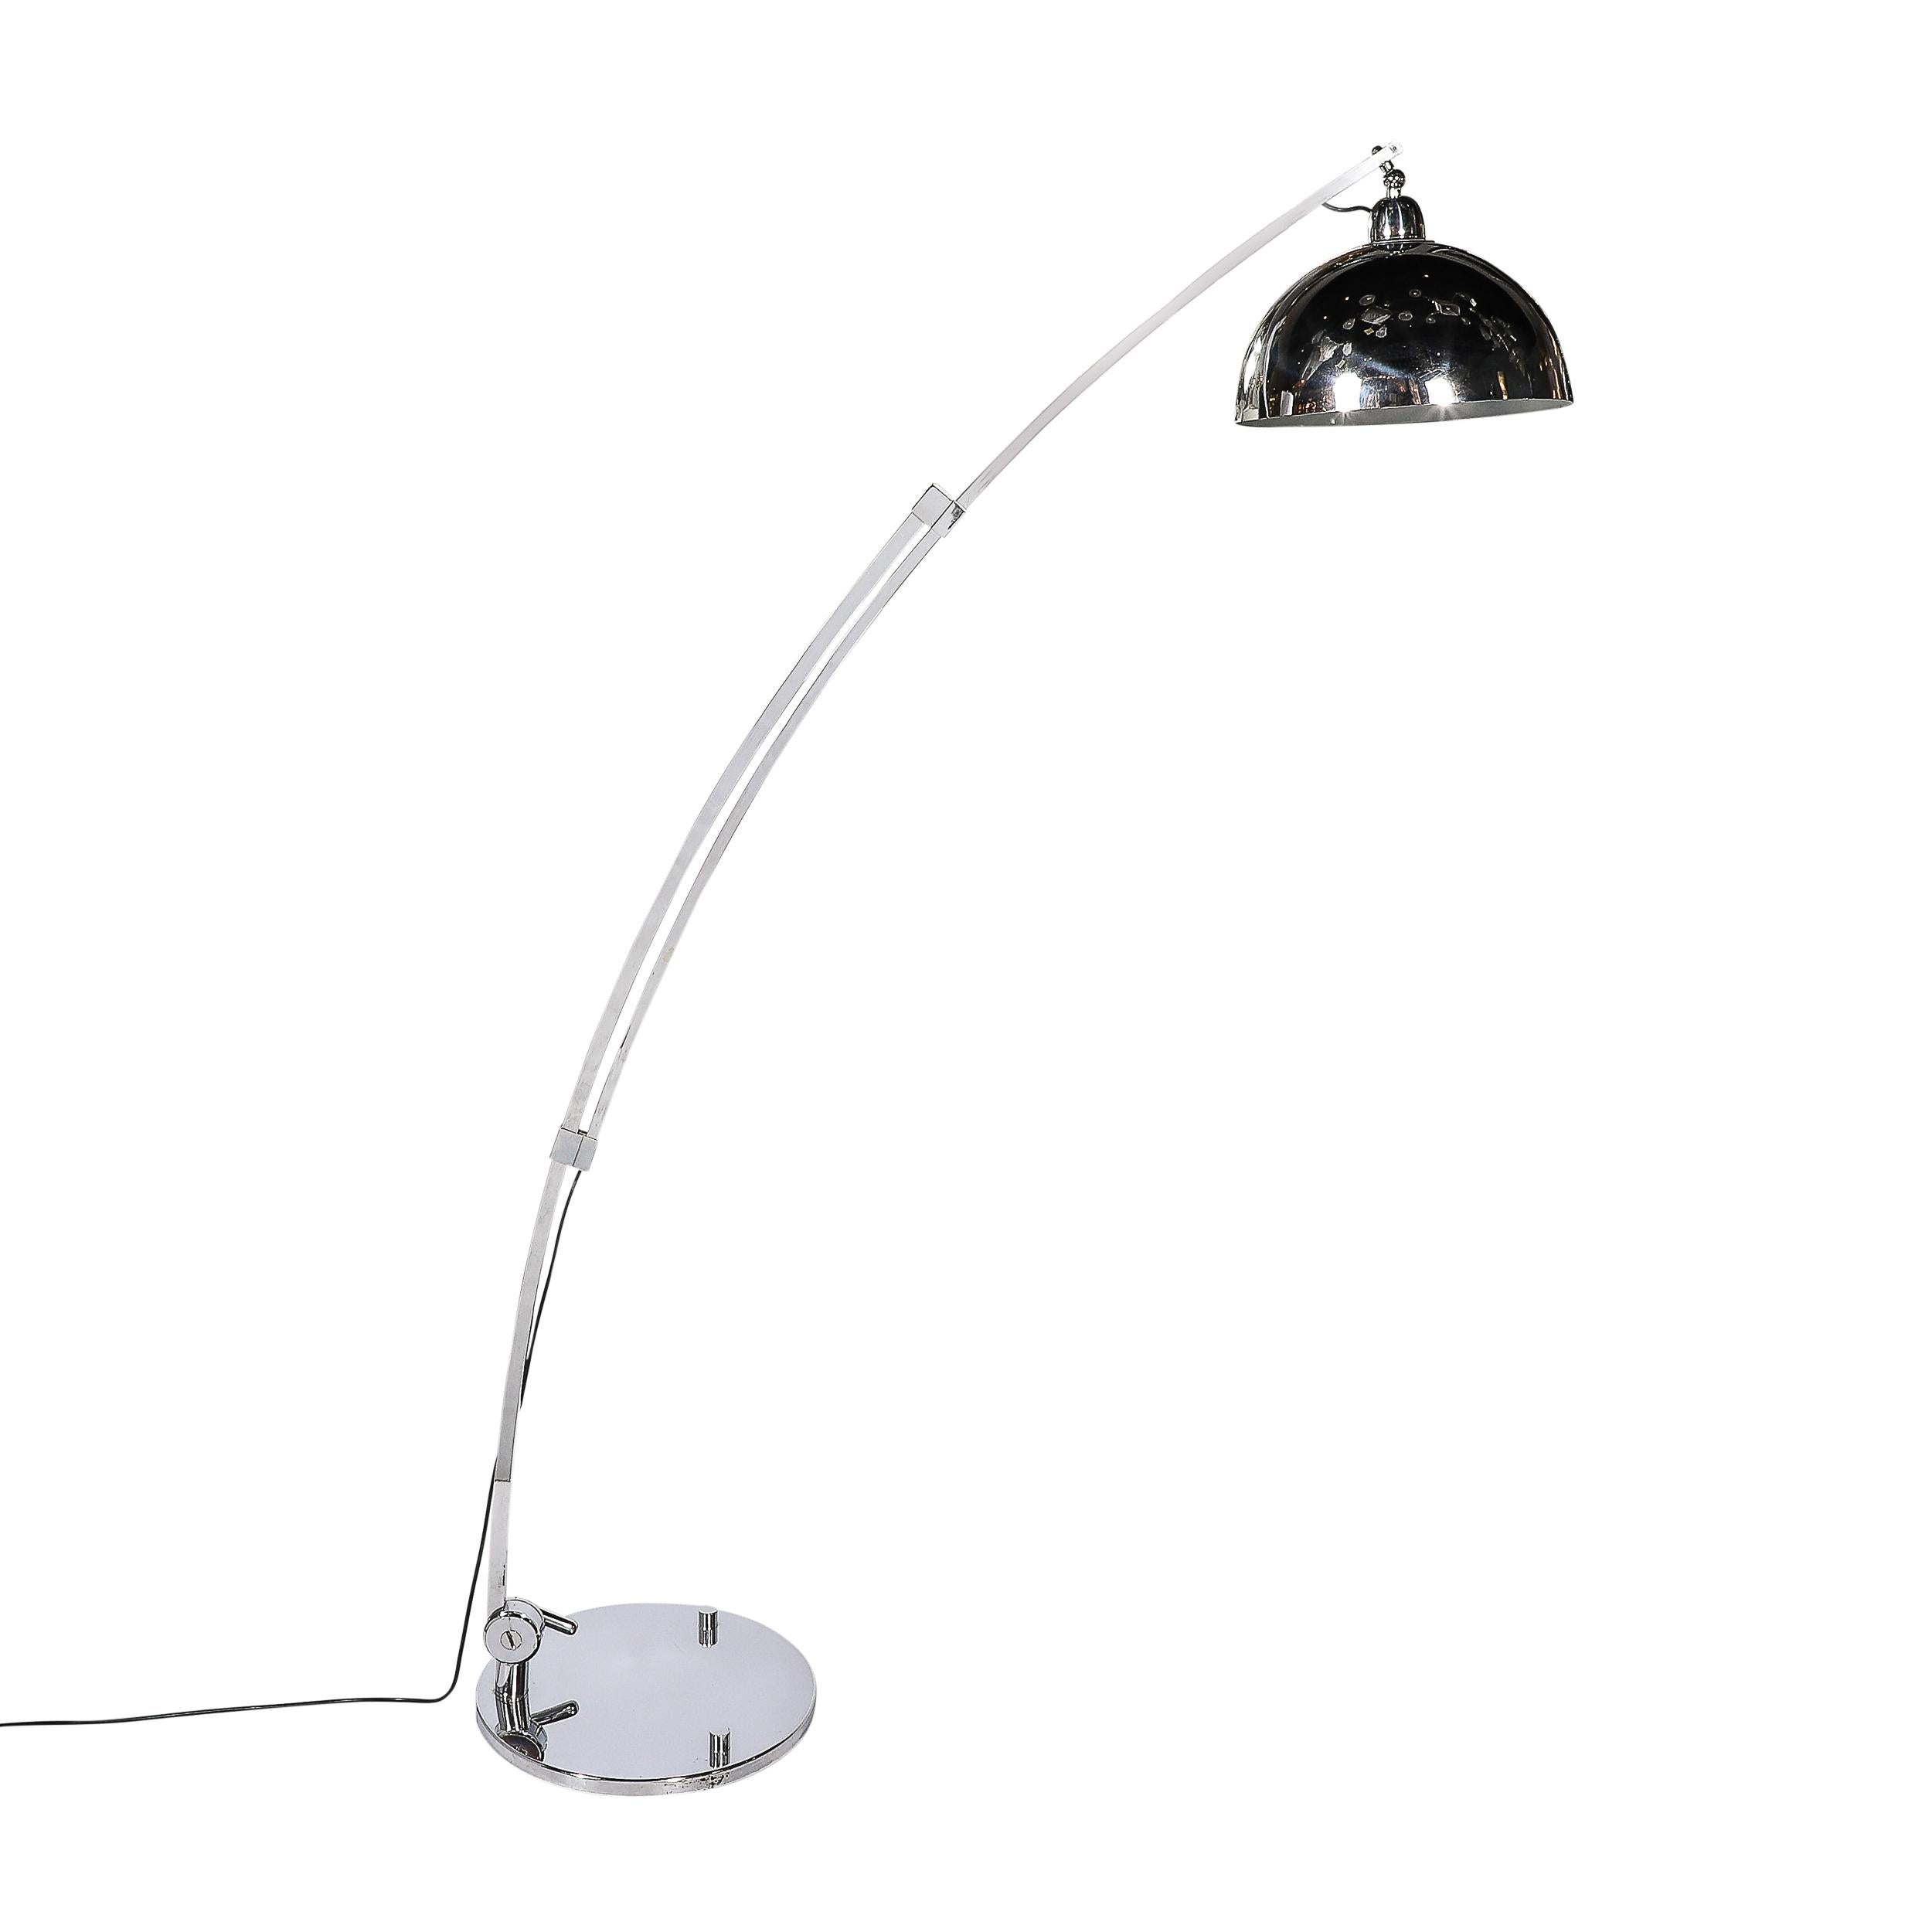 Mid-Century Modernist Extendable Arching Floor Lamp in Polished Chrome In Excellent Condition For Sale In New York, NY